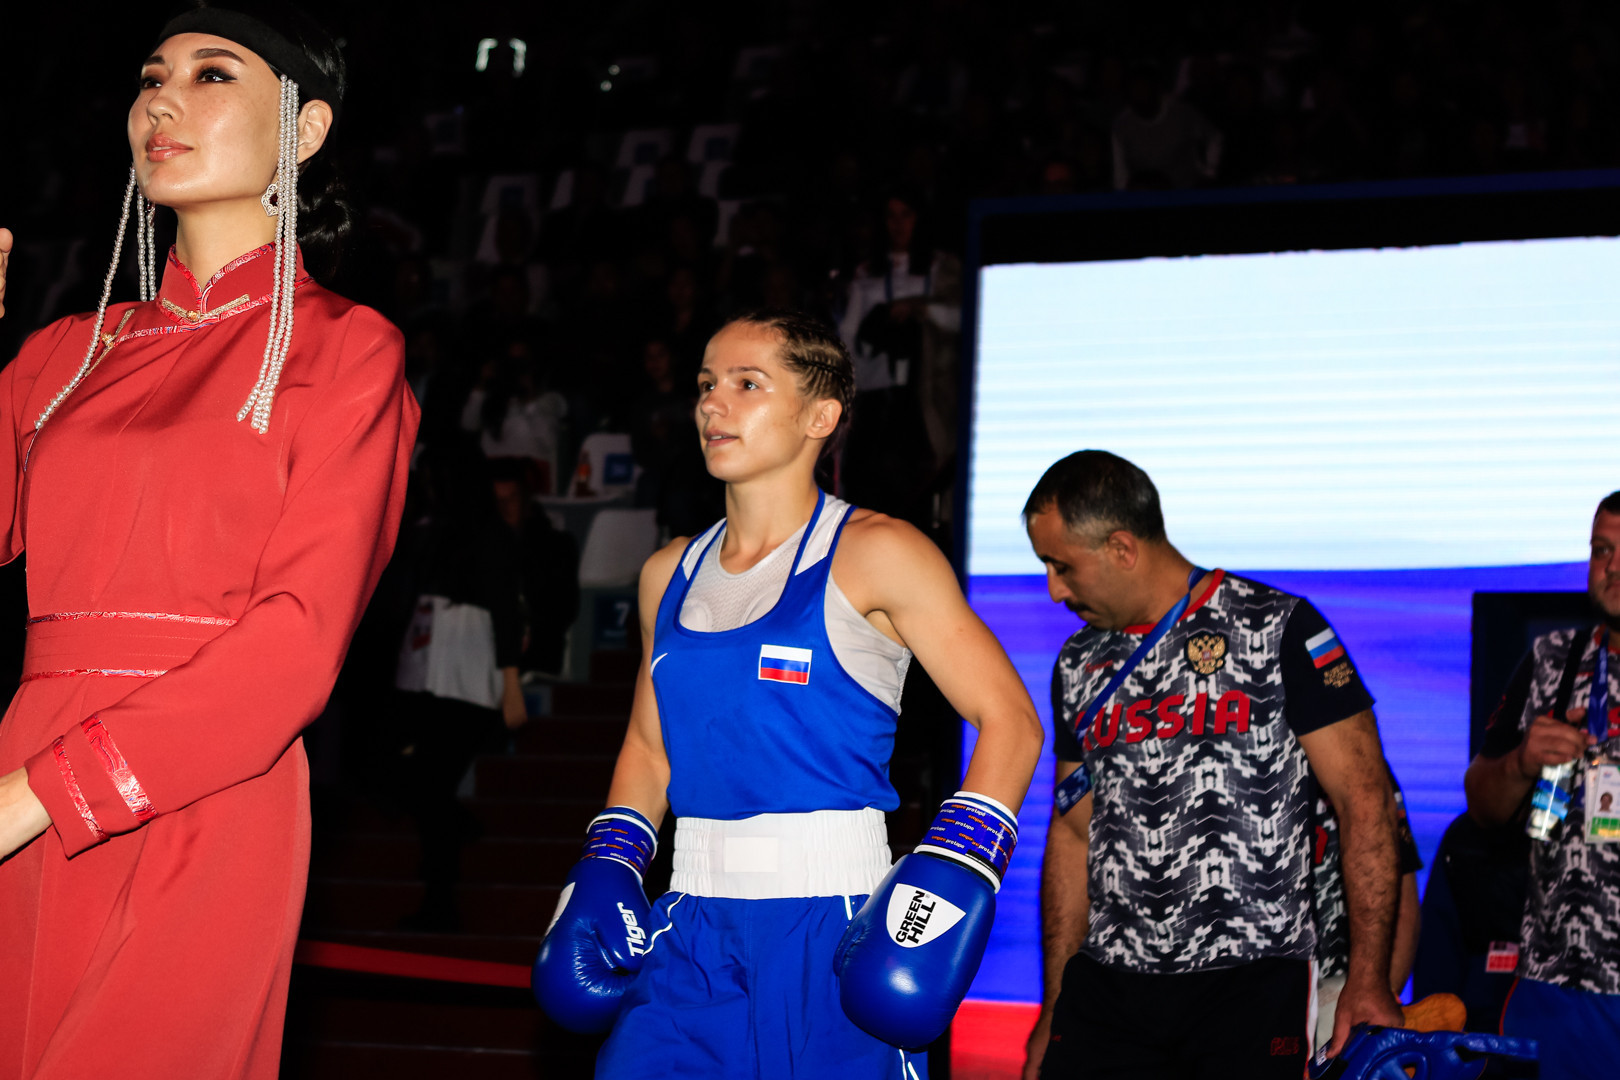 Liliya Aetbaeva received a rapturous reception from the Russian crowd in the venue ©Russian Boxing Federation